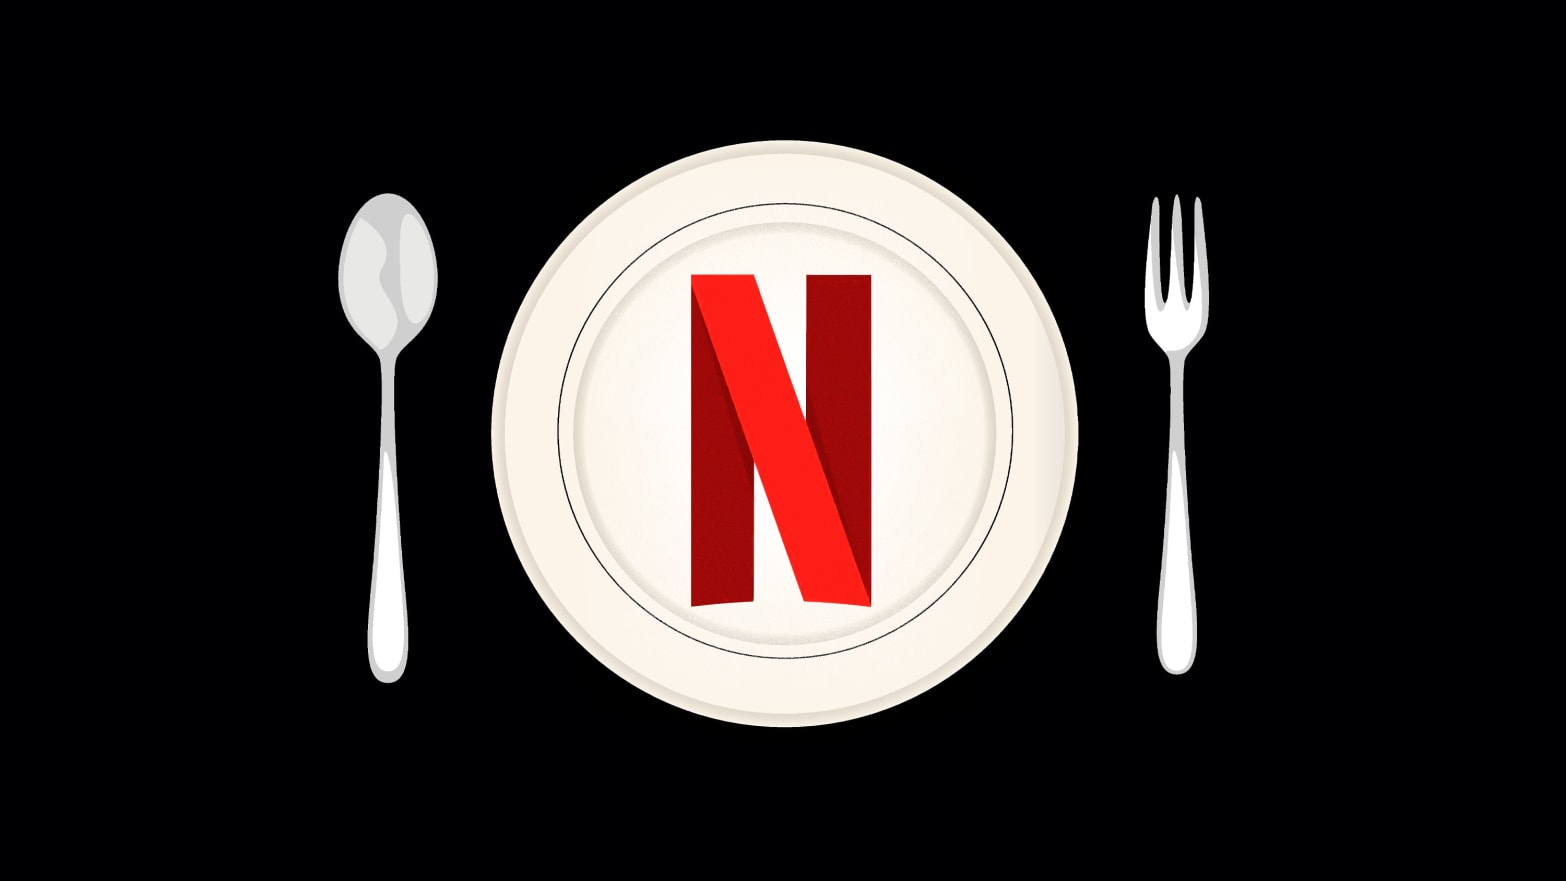 An illustration that includes images of a Dinner Party and the Netflix logo.